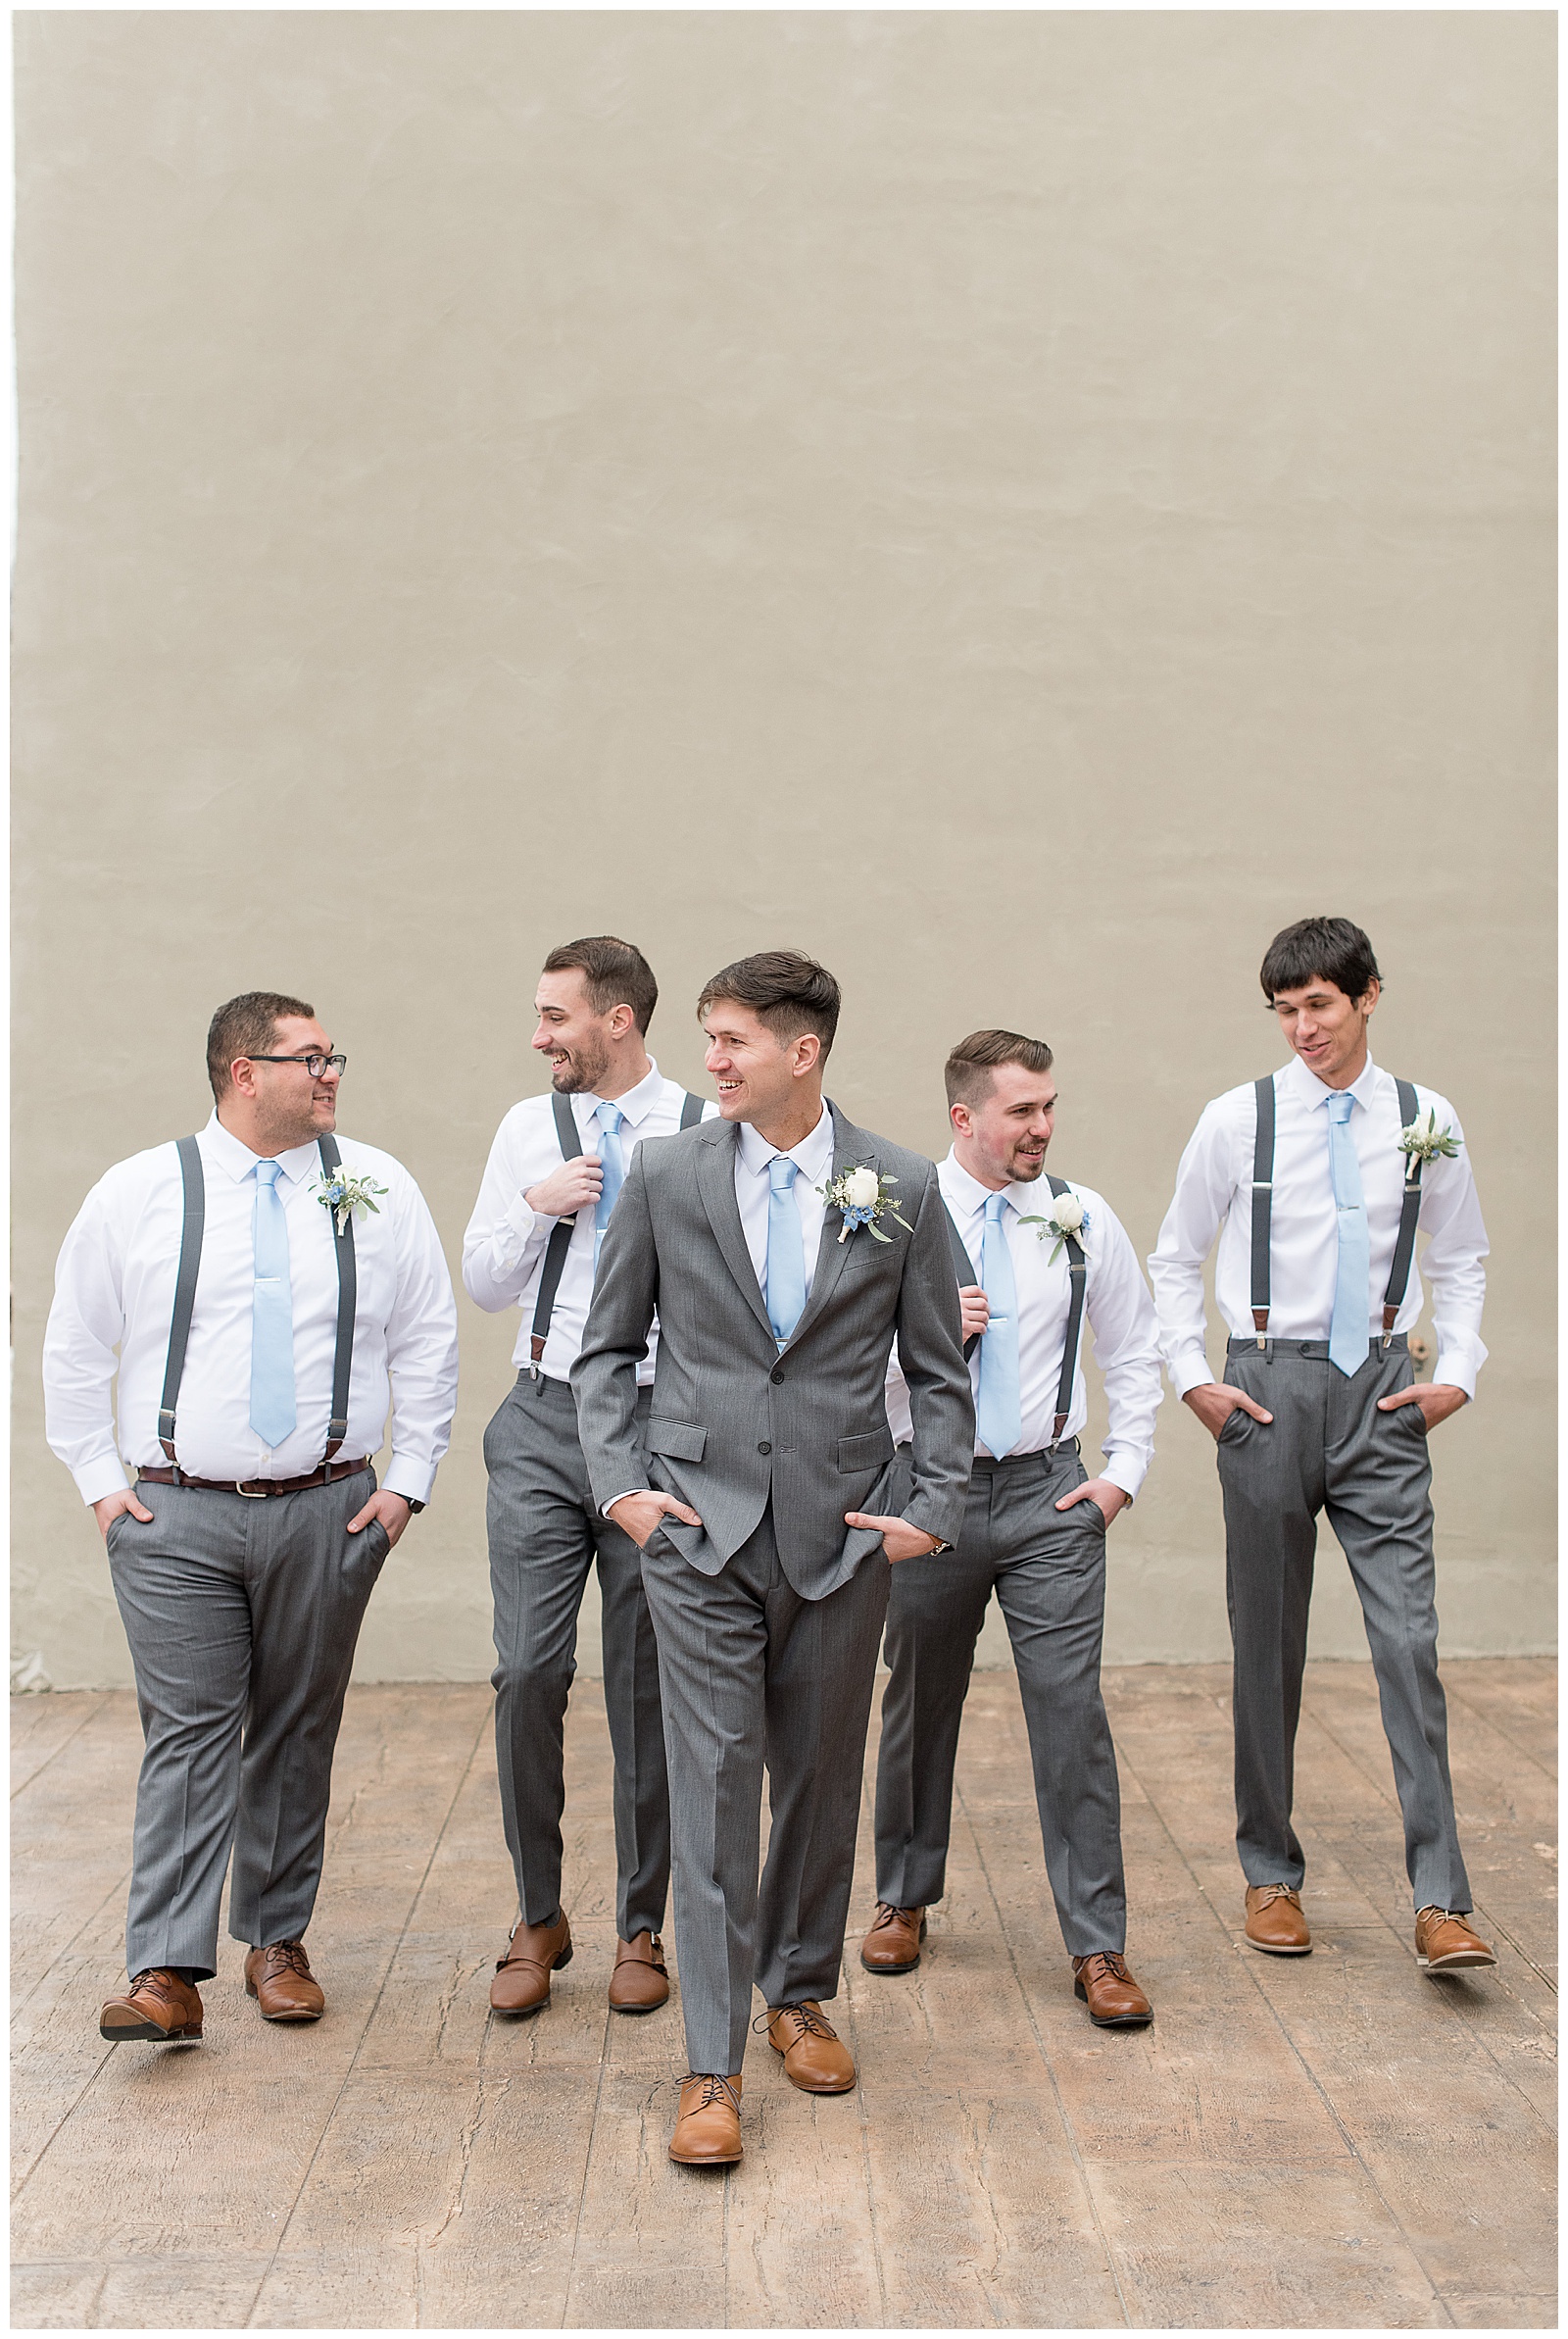 groom walking towards camera with groomsmen also walking behind him with their hands in their pockets all looking at one another smiling